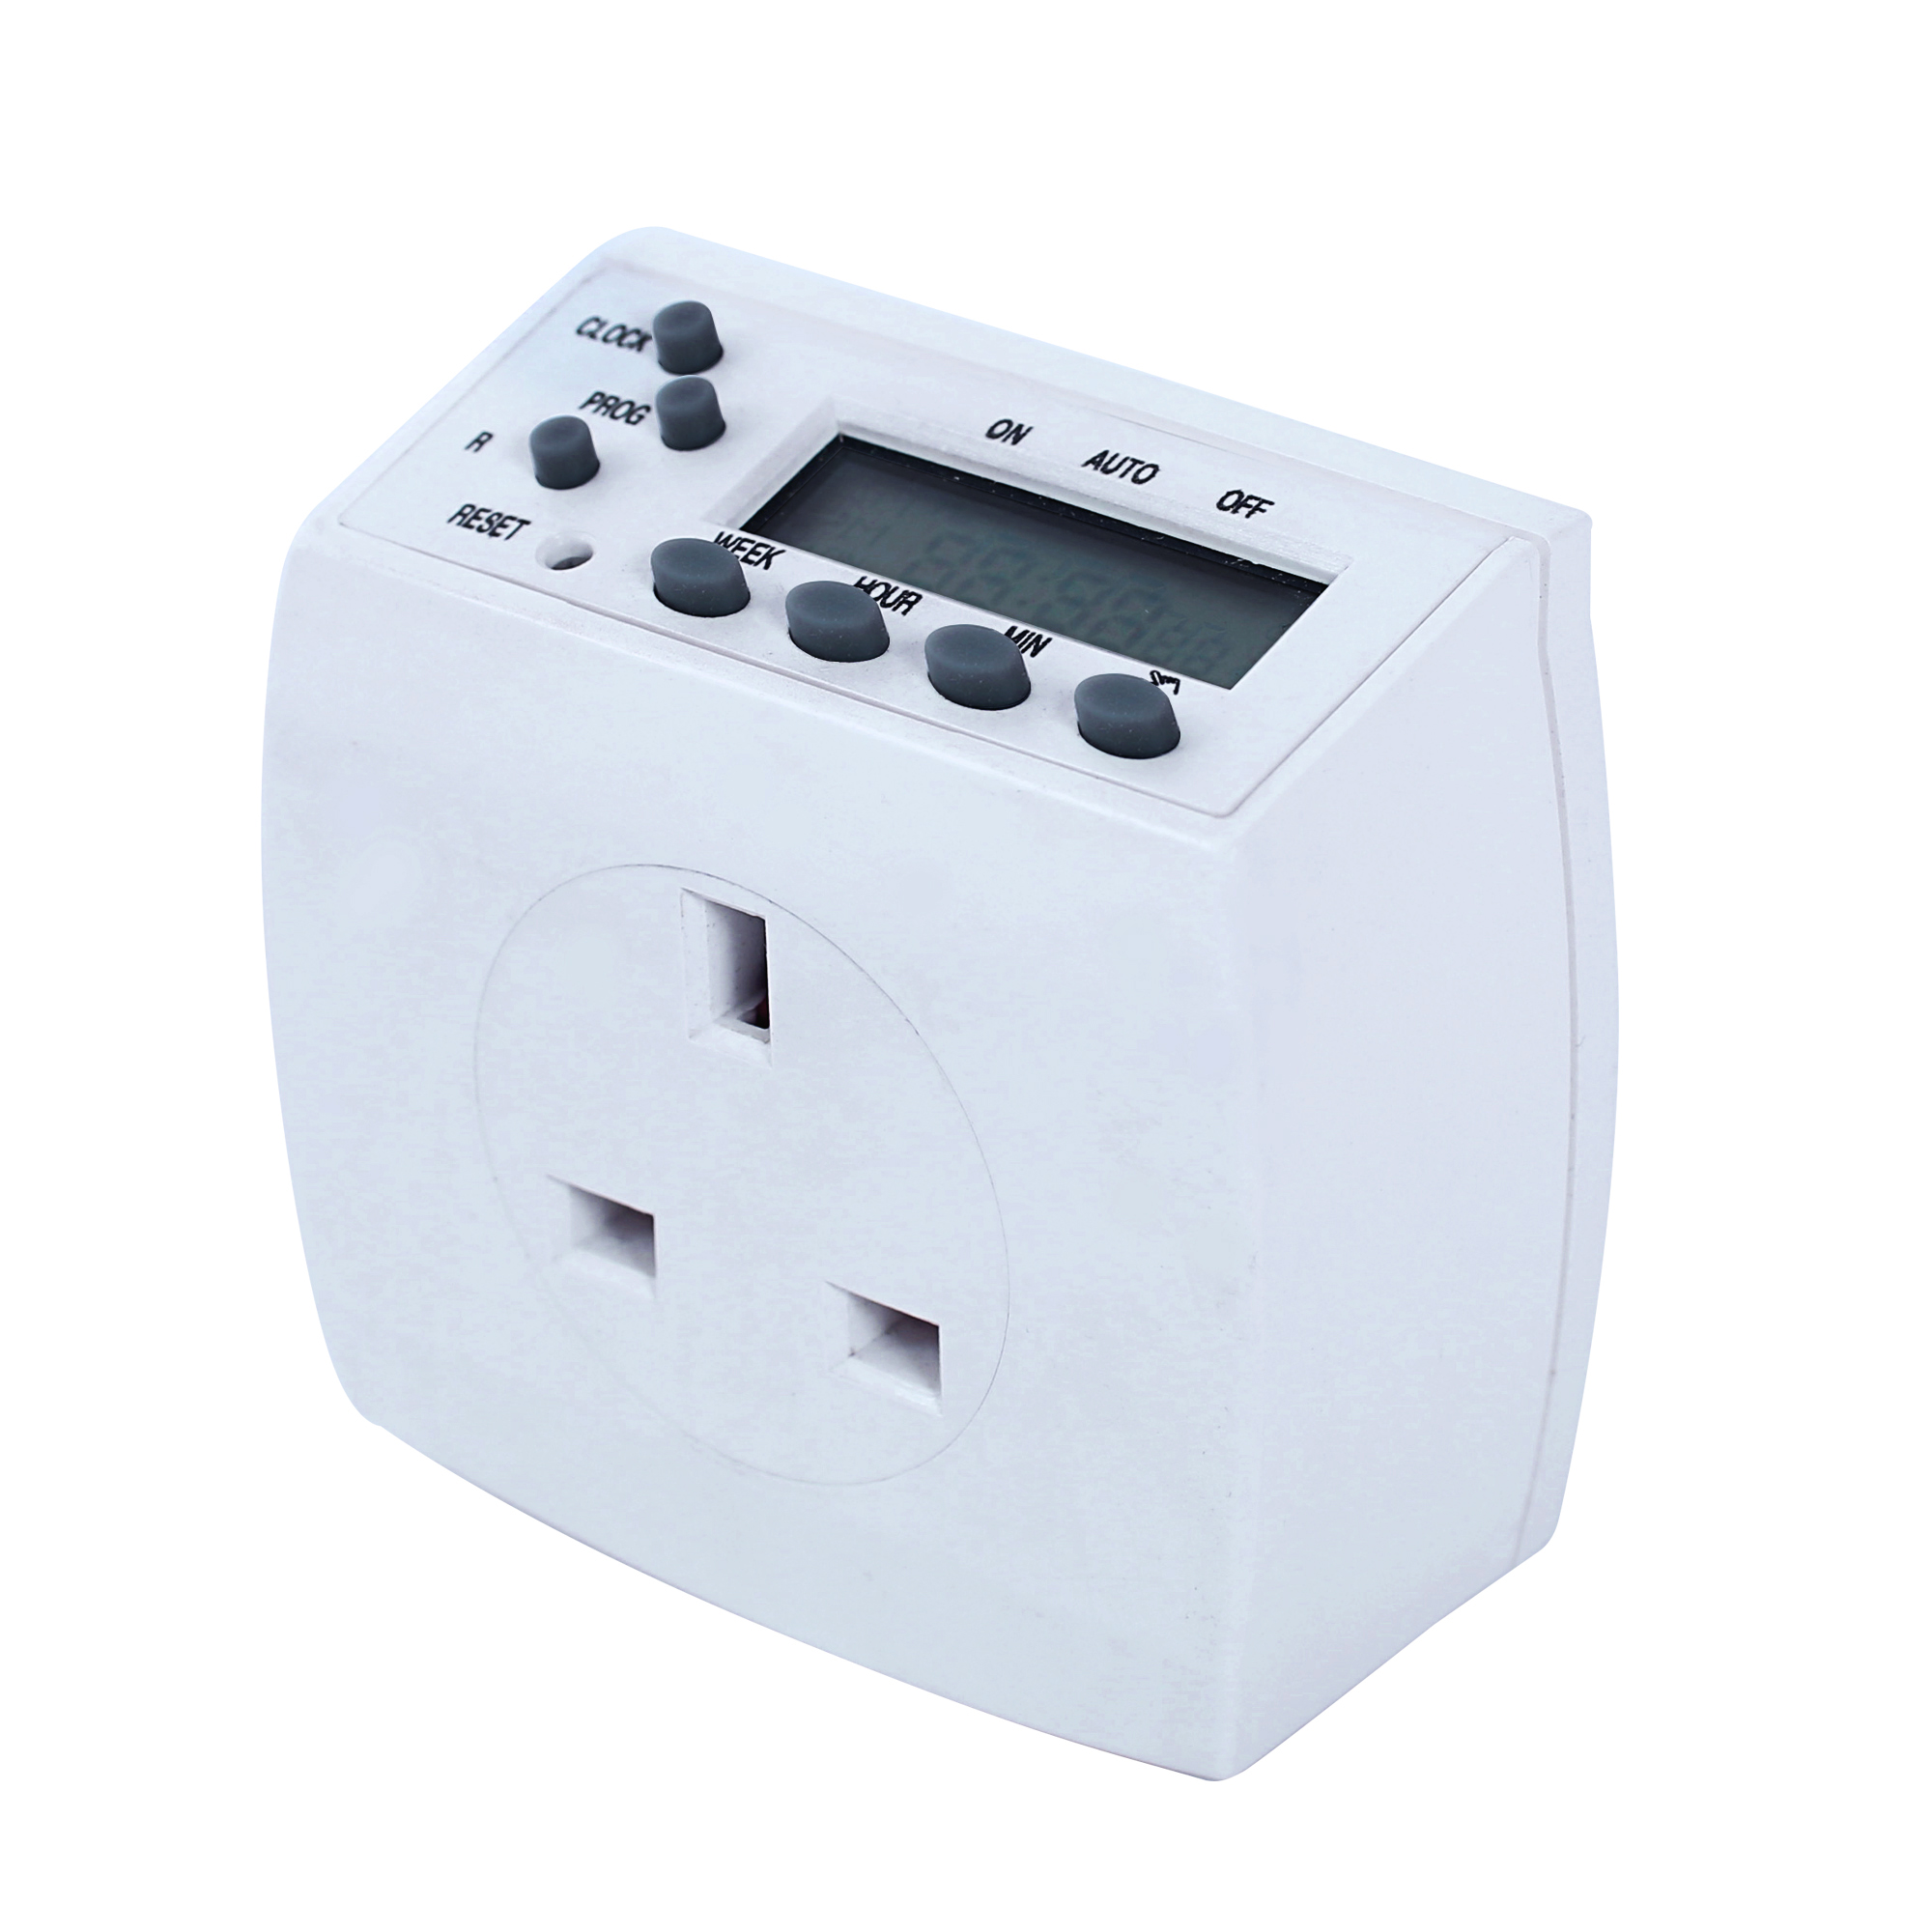 HBN Weekly Energy Saving Plug-In Electronic Timer Switch, BND-50/SE2